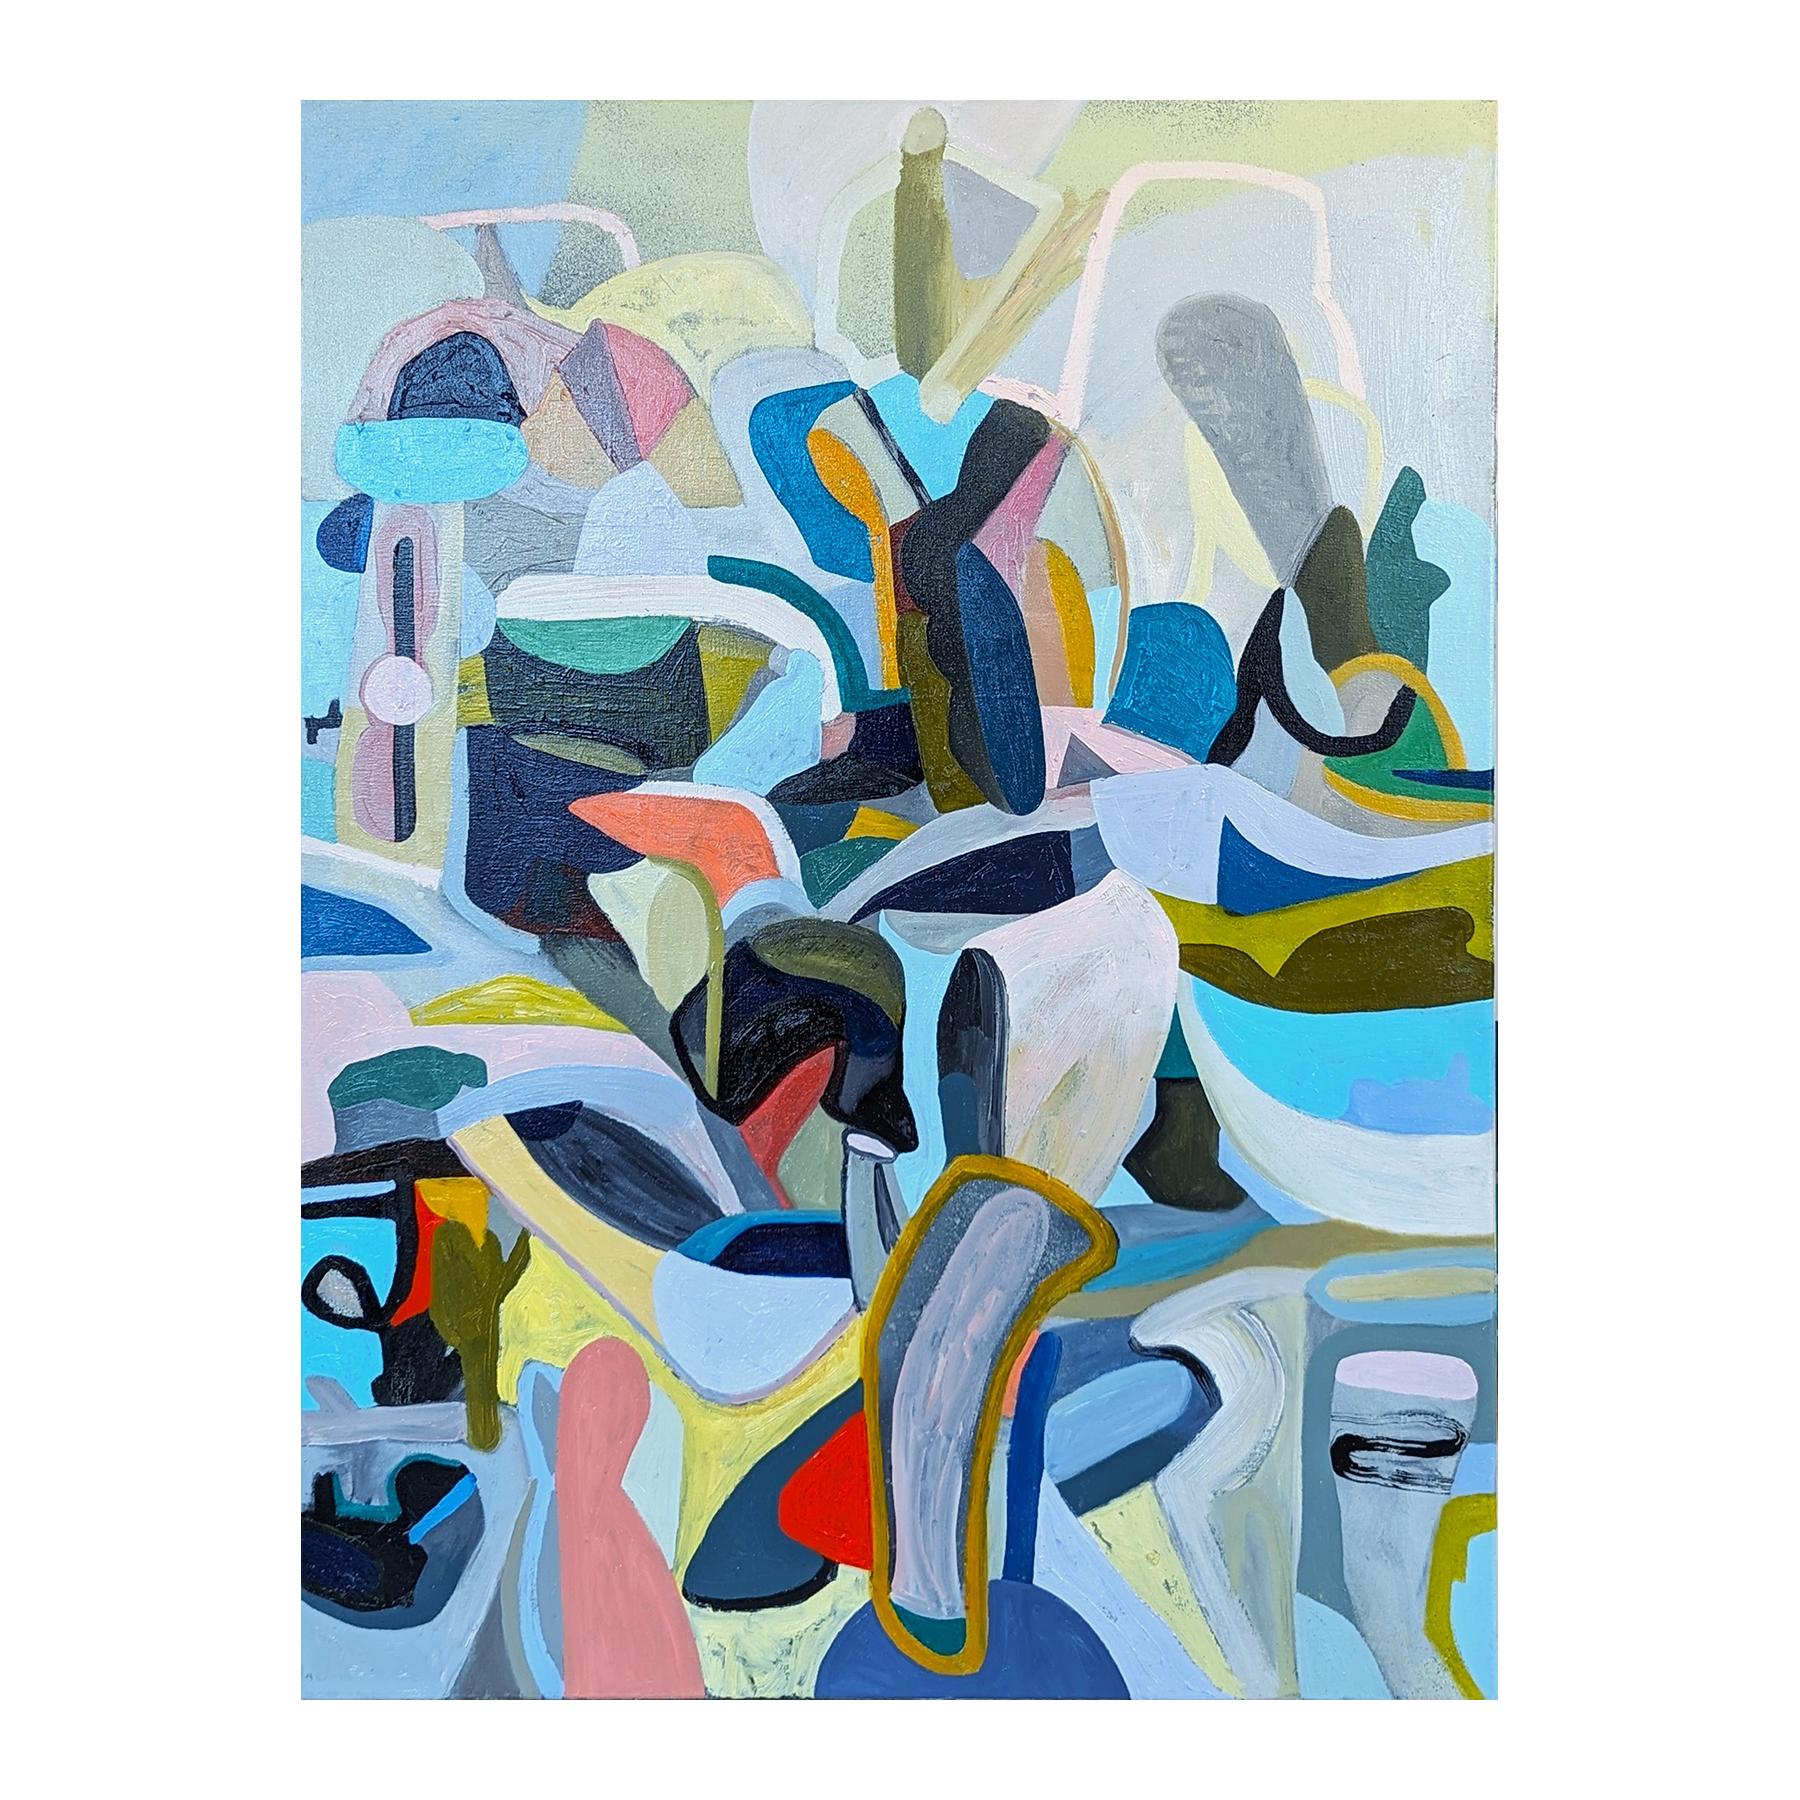 Colorful abstract painting by contemporary Houston artist Peter Healy. The work features a variety of vibrant, hard-edged intertwined shapes. Signed, titled, and dated on the reverse. Currently unframed, but options are available.

Artist Biography: